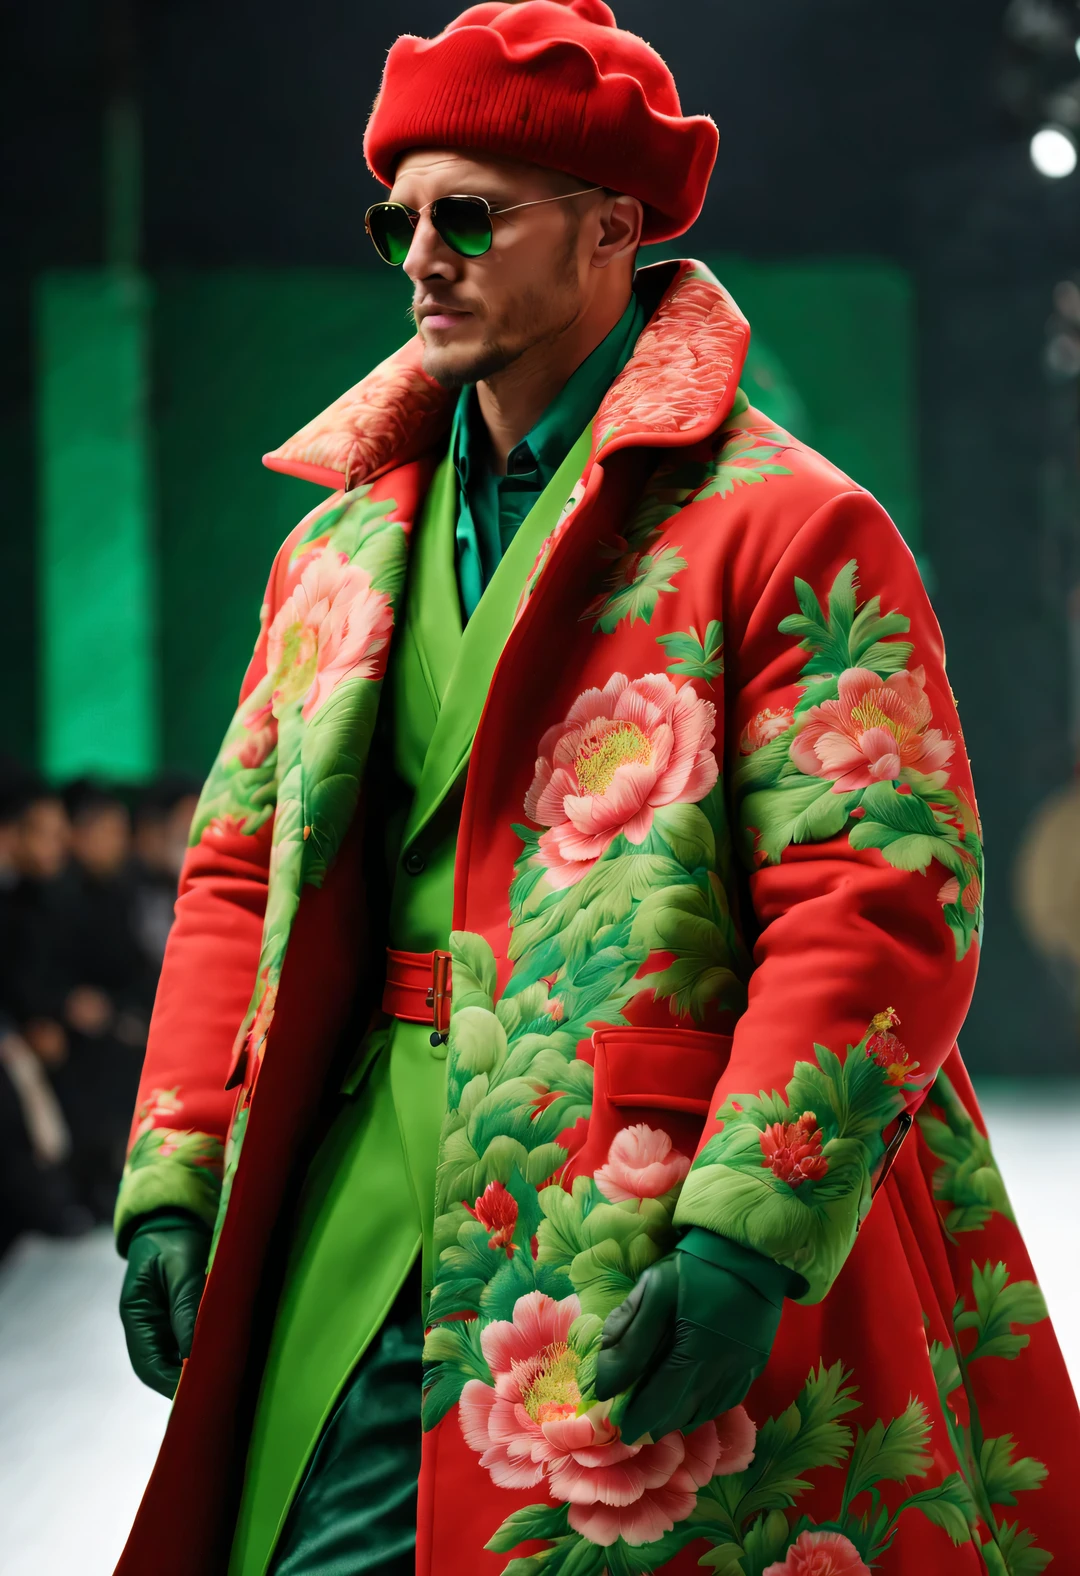 Alberto Seviso style，On the fashion show, Tom Hardy, Tall fit male model, (Wearing a thick cotton coat made of red and green peony cloth: 1.34), (Extra long cotton military coat: 0.65), Has warmth、Windproof cotton coat, peony flower, Leaves, Embroidery with Suzhou red and green peony pattern as the theme, (Tan fur coat collar), (tibetan shaman jewelry), complex mixed styles, (Gentlemanly manners), Embroidered Su Embroidery Big Red Parka Snow Coat, woolen hat, (exceed) coat jacket, big duckbill hat, (Black Sweater, winter scarf warm scarf), gloves gloves, belt, Cotton boots, sunglasses, Combat boots, sports shoes, big photography,
background: Heavy snow on indoor T-shaped track, T-shaped platform, depth of field, Ultra-clear, super high quality, Bottom-up perspective,